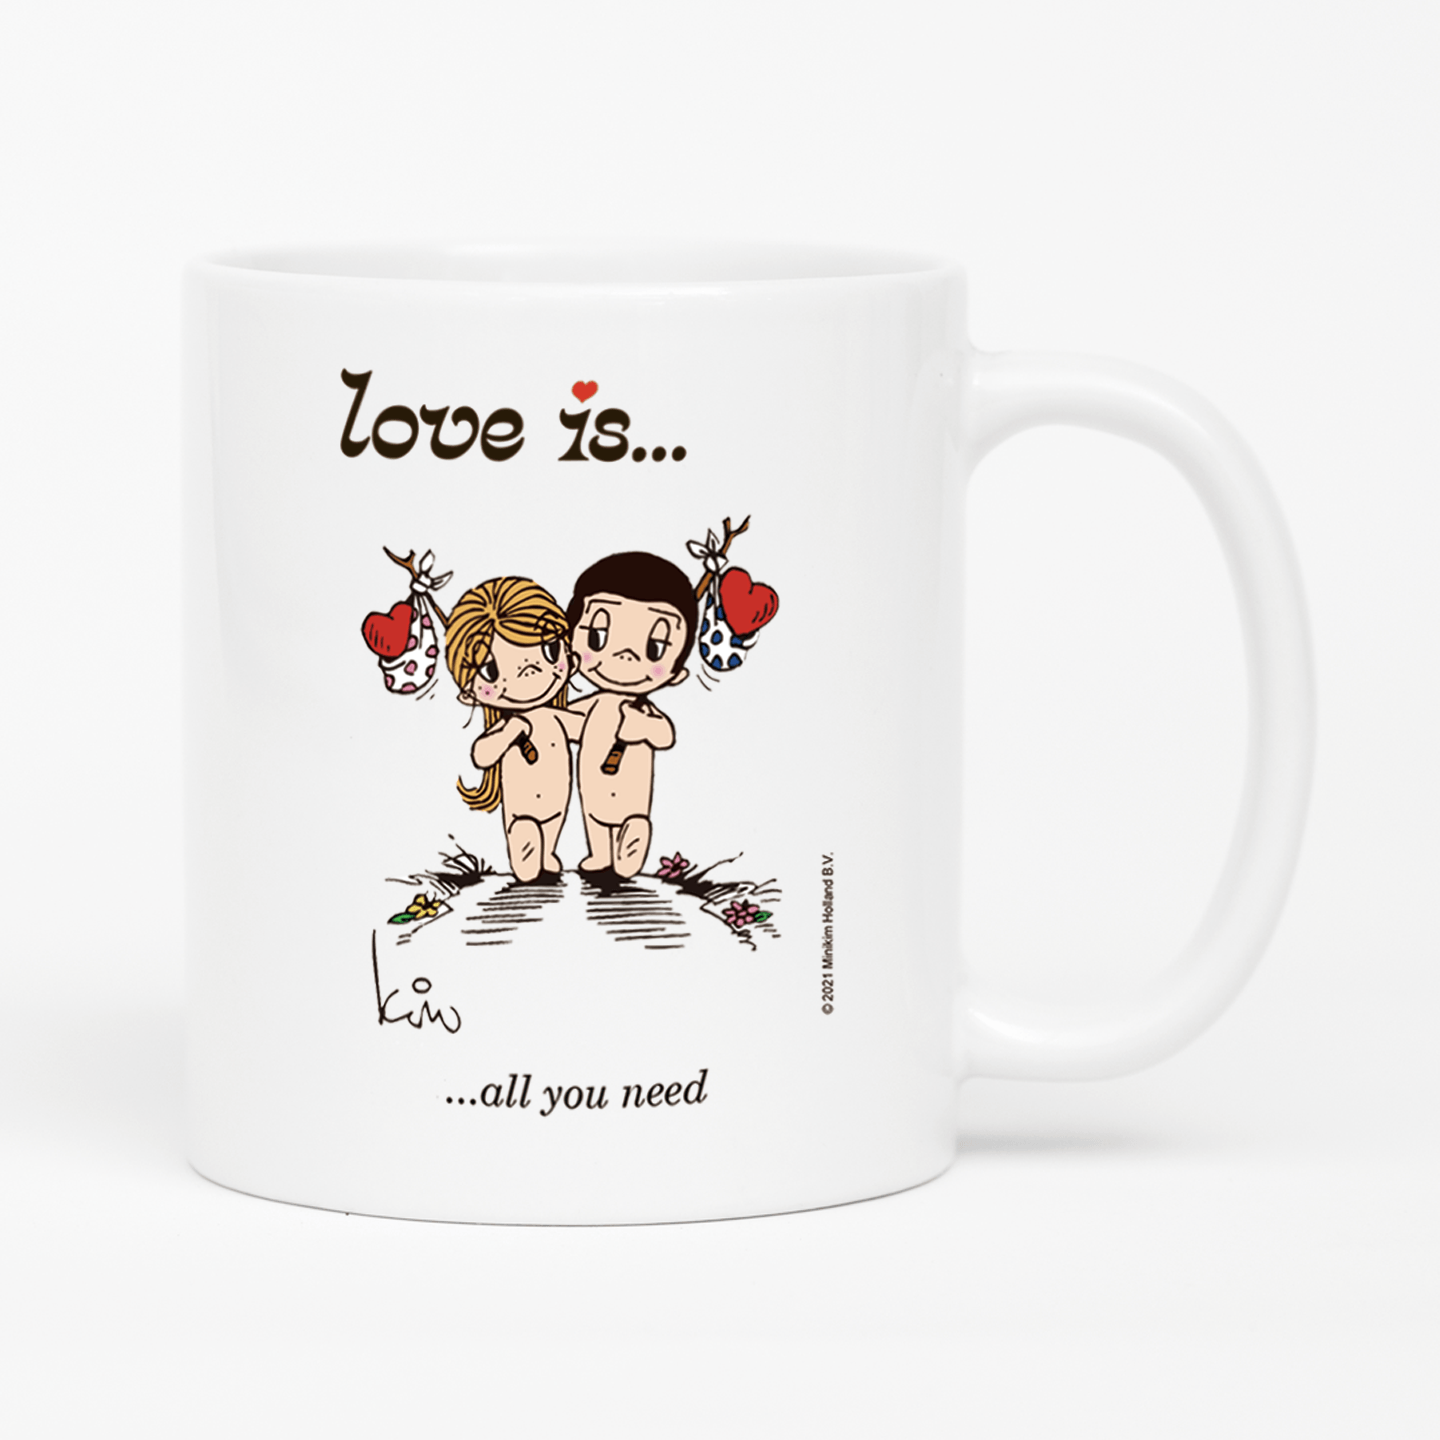 Front view: Love is... all you need  personalized ceramic mug by Kim Casali. 